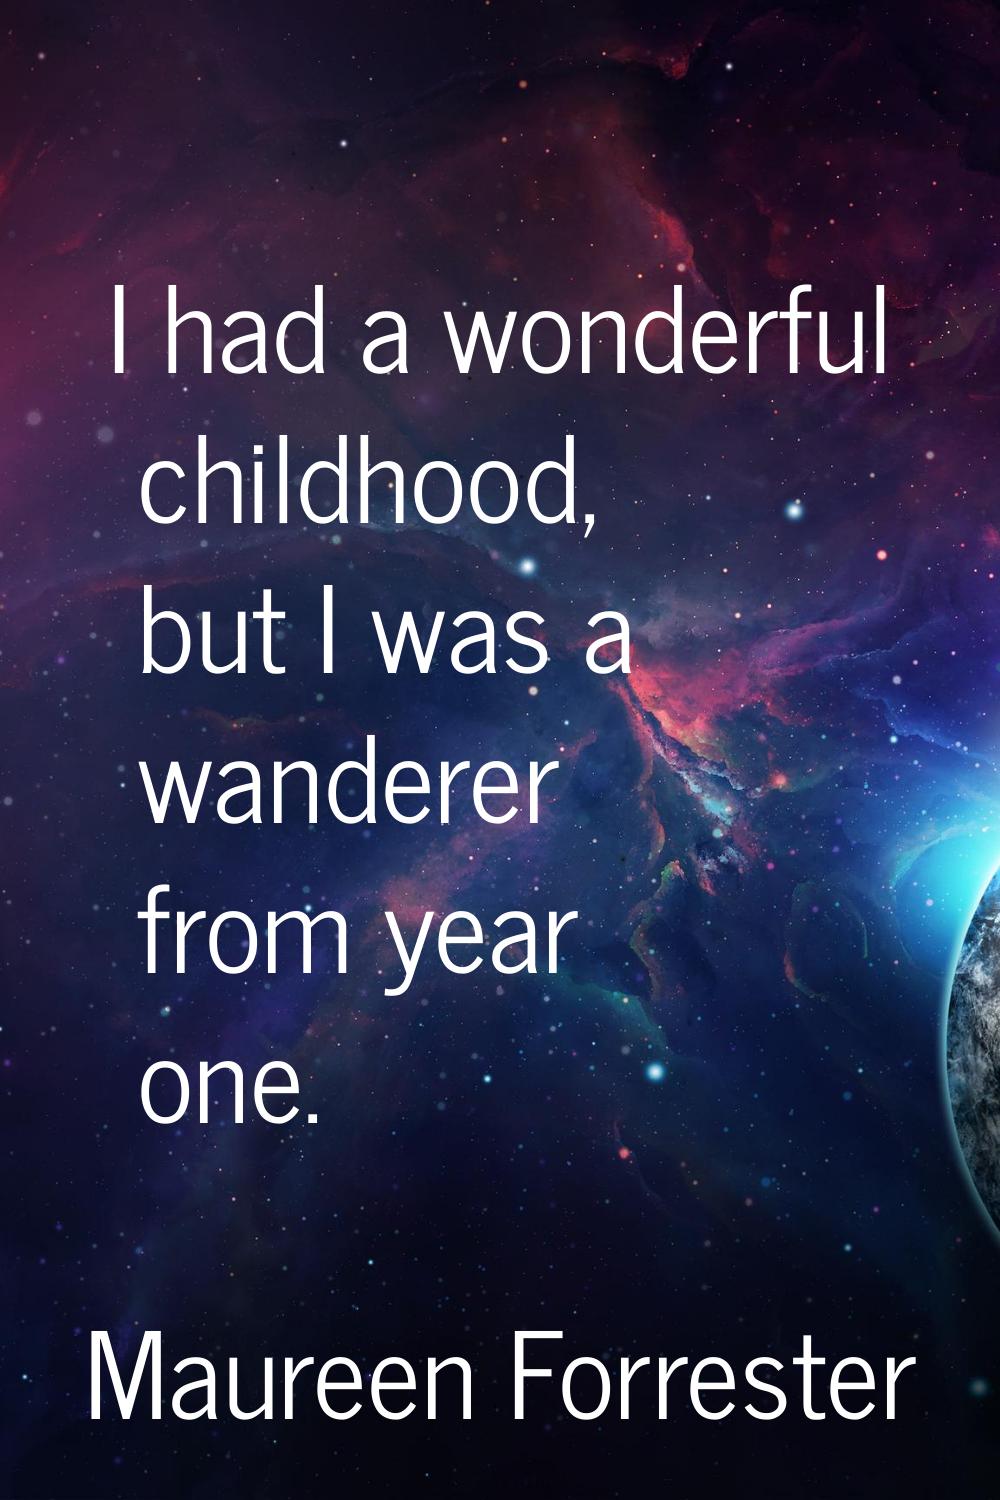 I had a wonderful childhood, but I was a wanderer from year one.